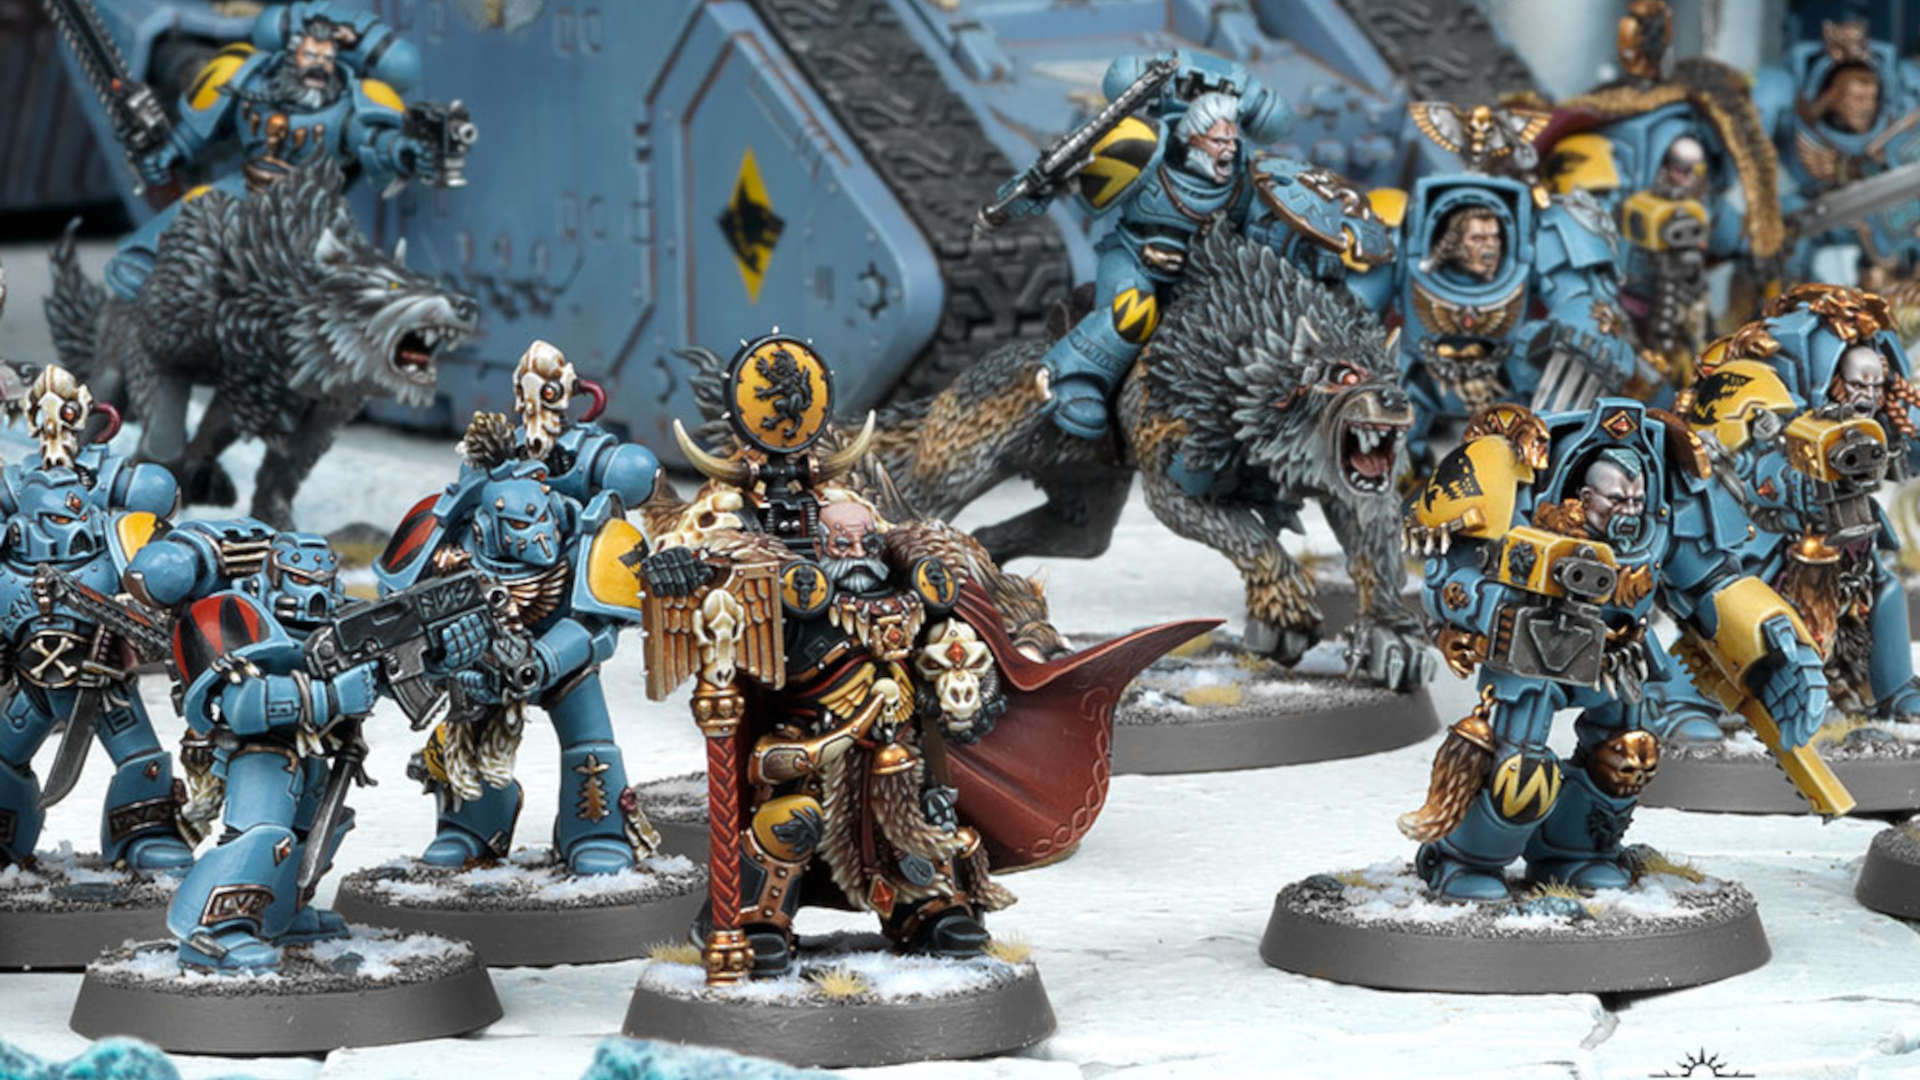 Warhammer 40k Space Wolves - Ulrik the slayer, a black-armoured Wolf Priest, rests his hand on his crozius staff - around him are veteran warriors, some in terminator armour, others riding wolves